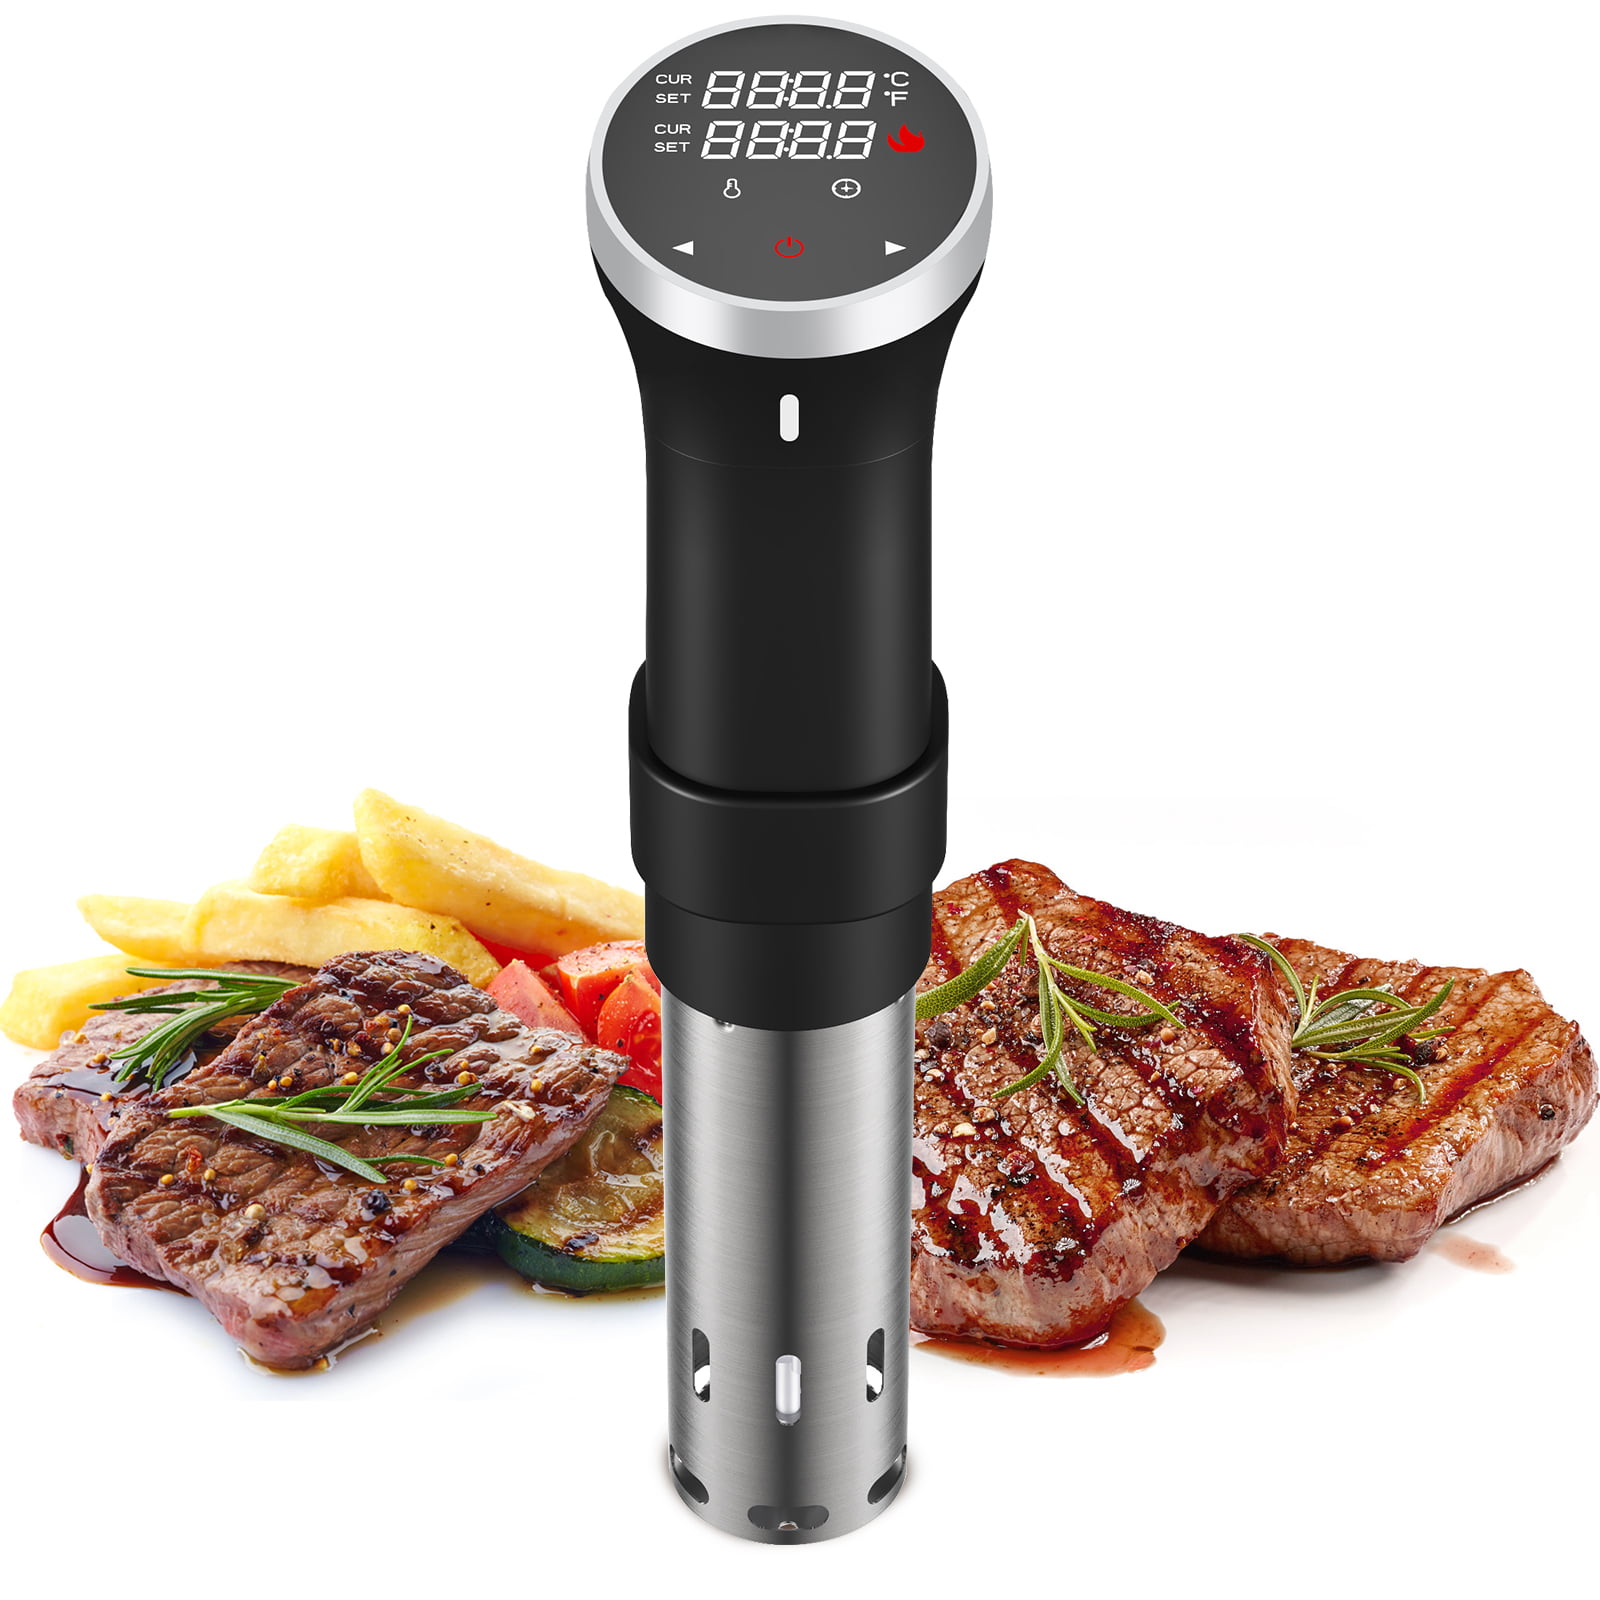 800W Sous Vide Precision Cooker Immersion Circulator Low Temperature Cooking ETL 